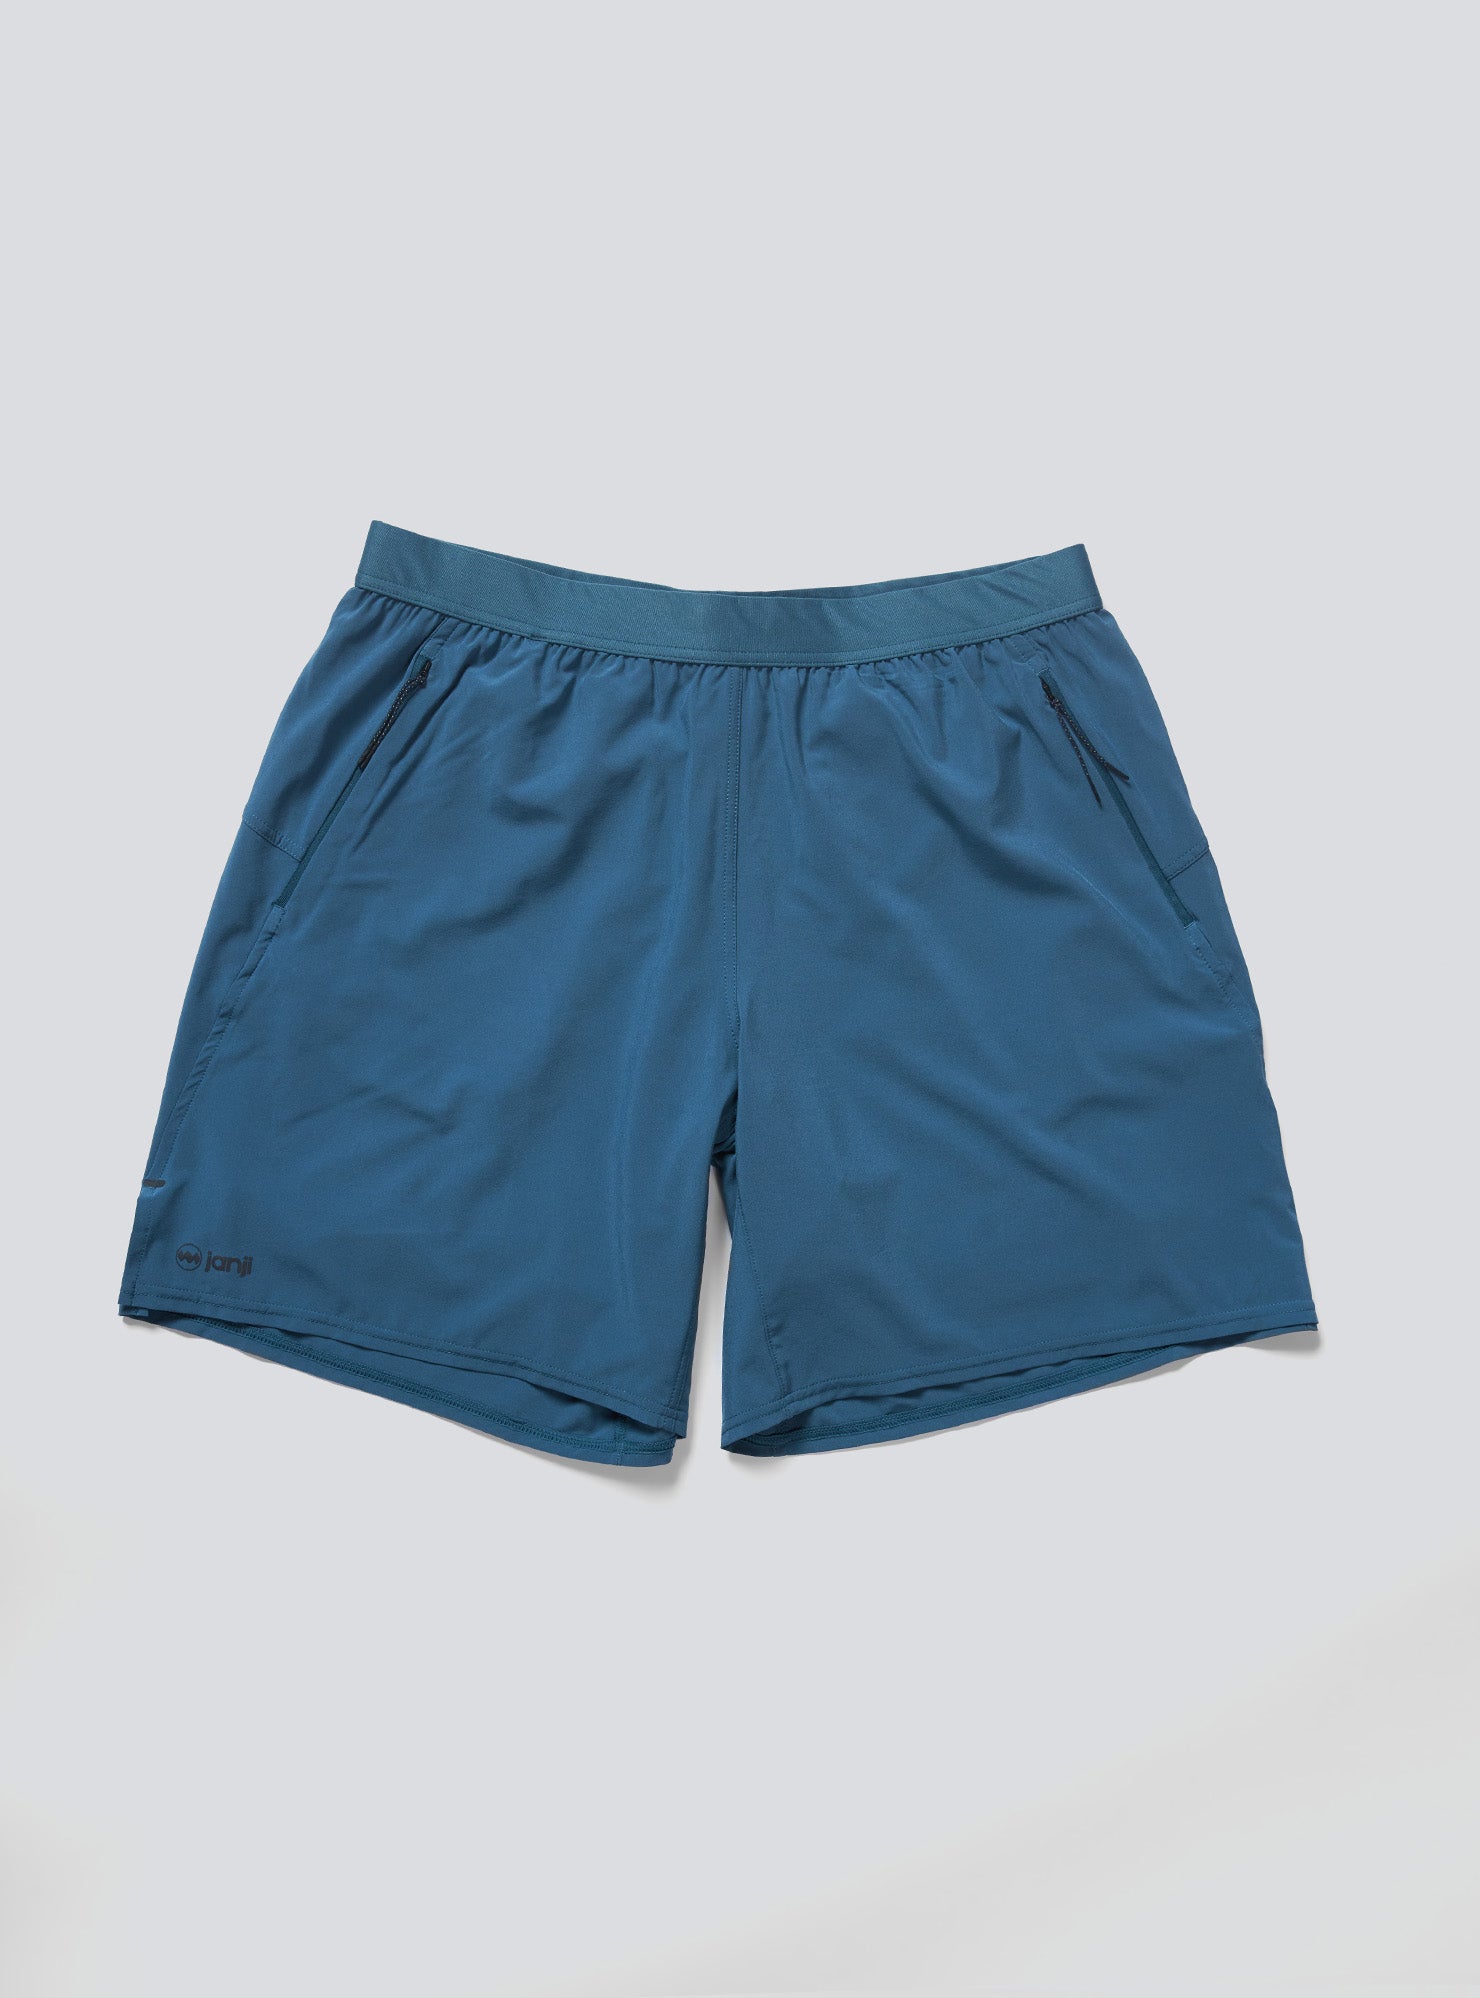 M's 7" Traverse Short 2-in-1